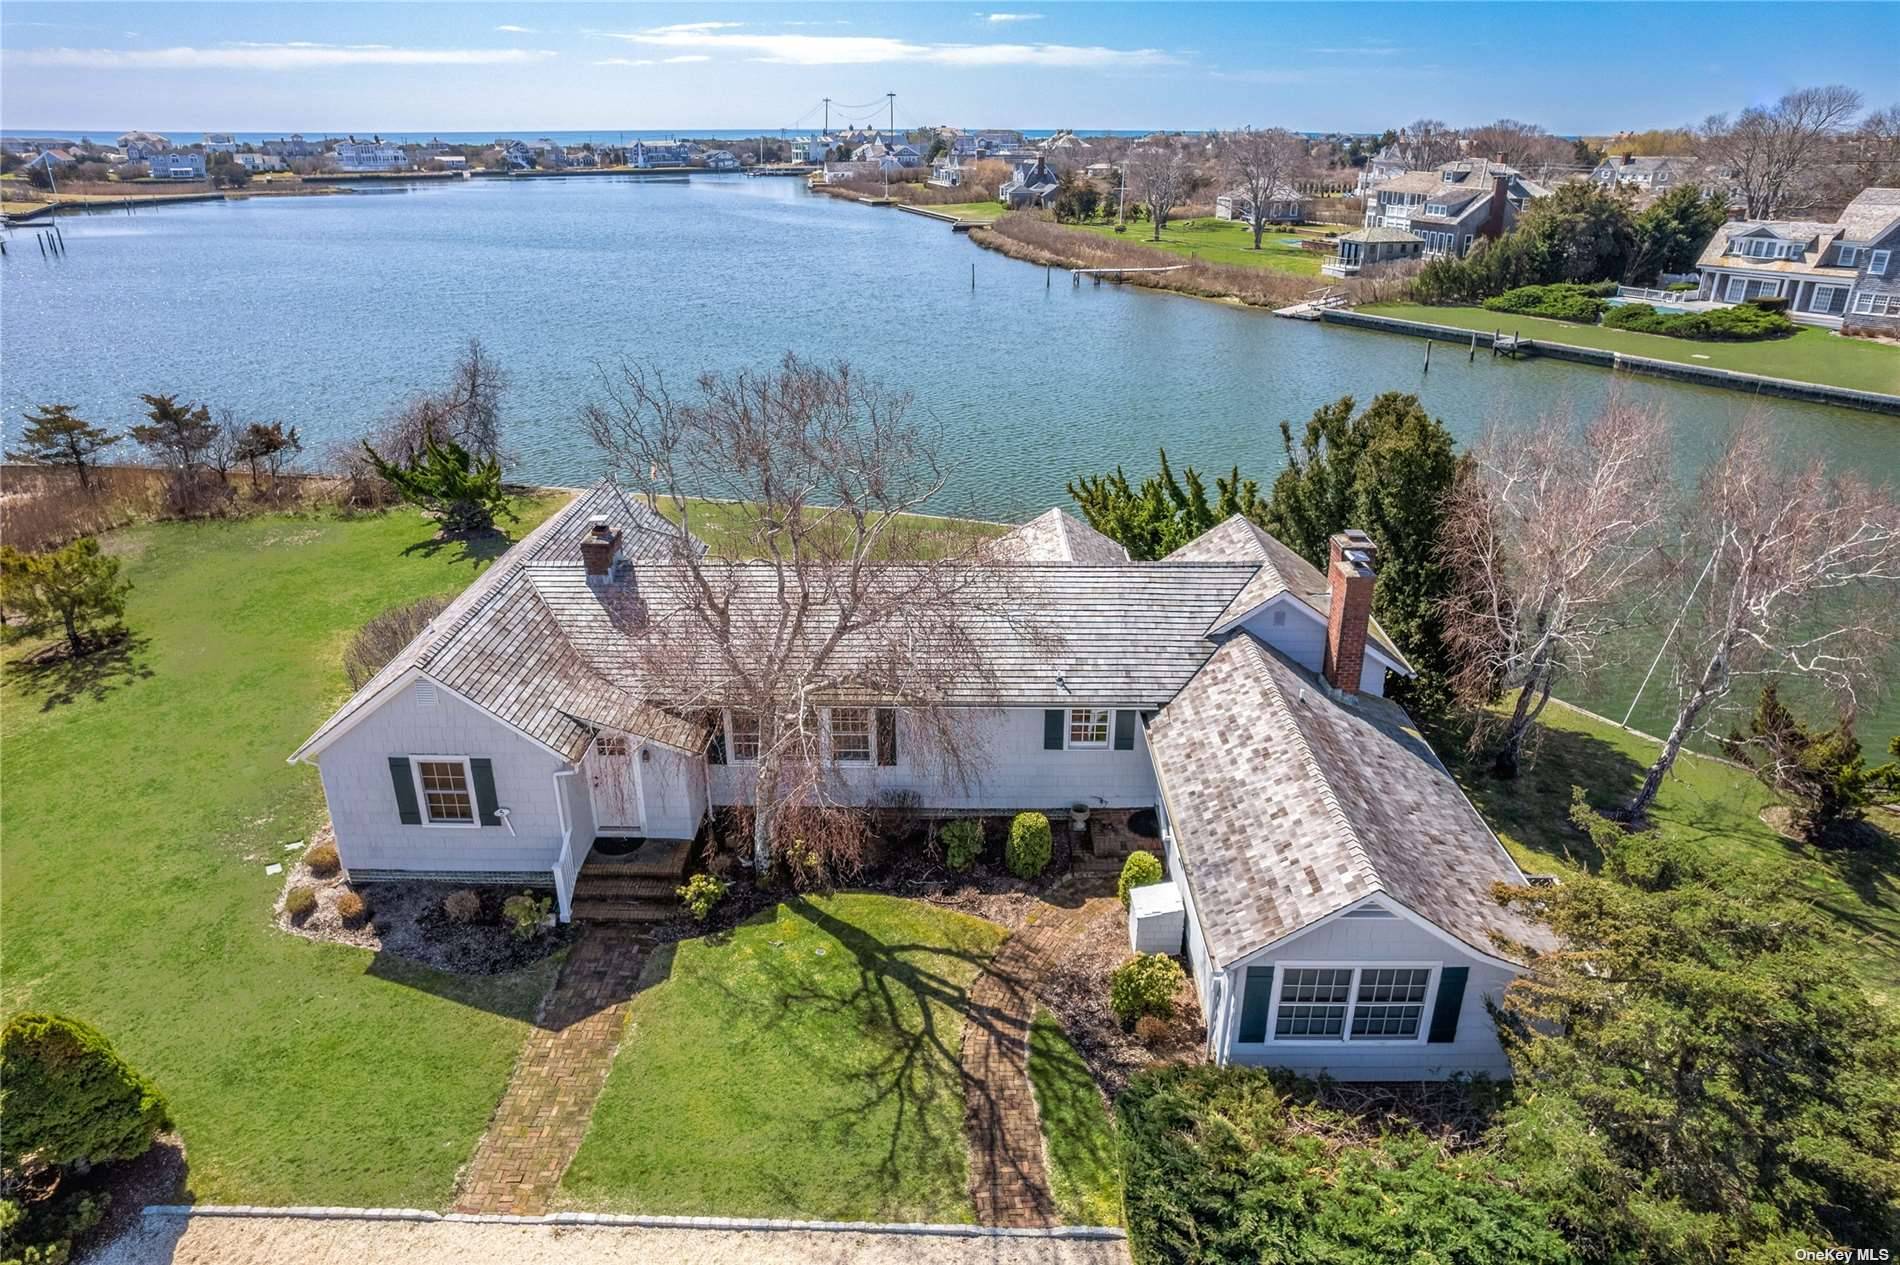 QUOGUE ESTATE SECTION WATERFRONT COTTAGE.